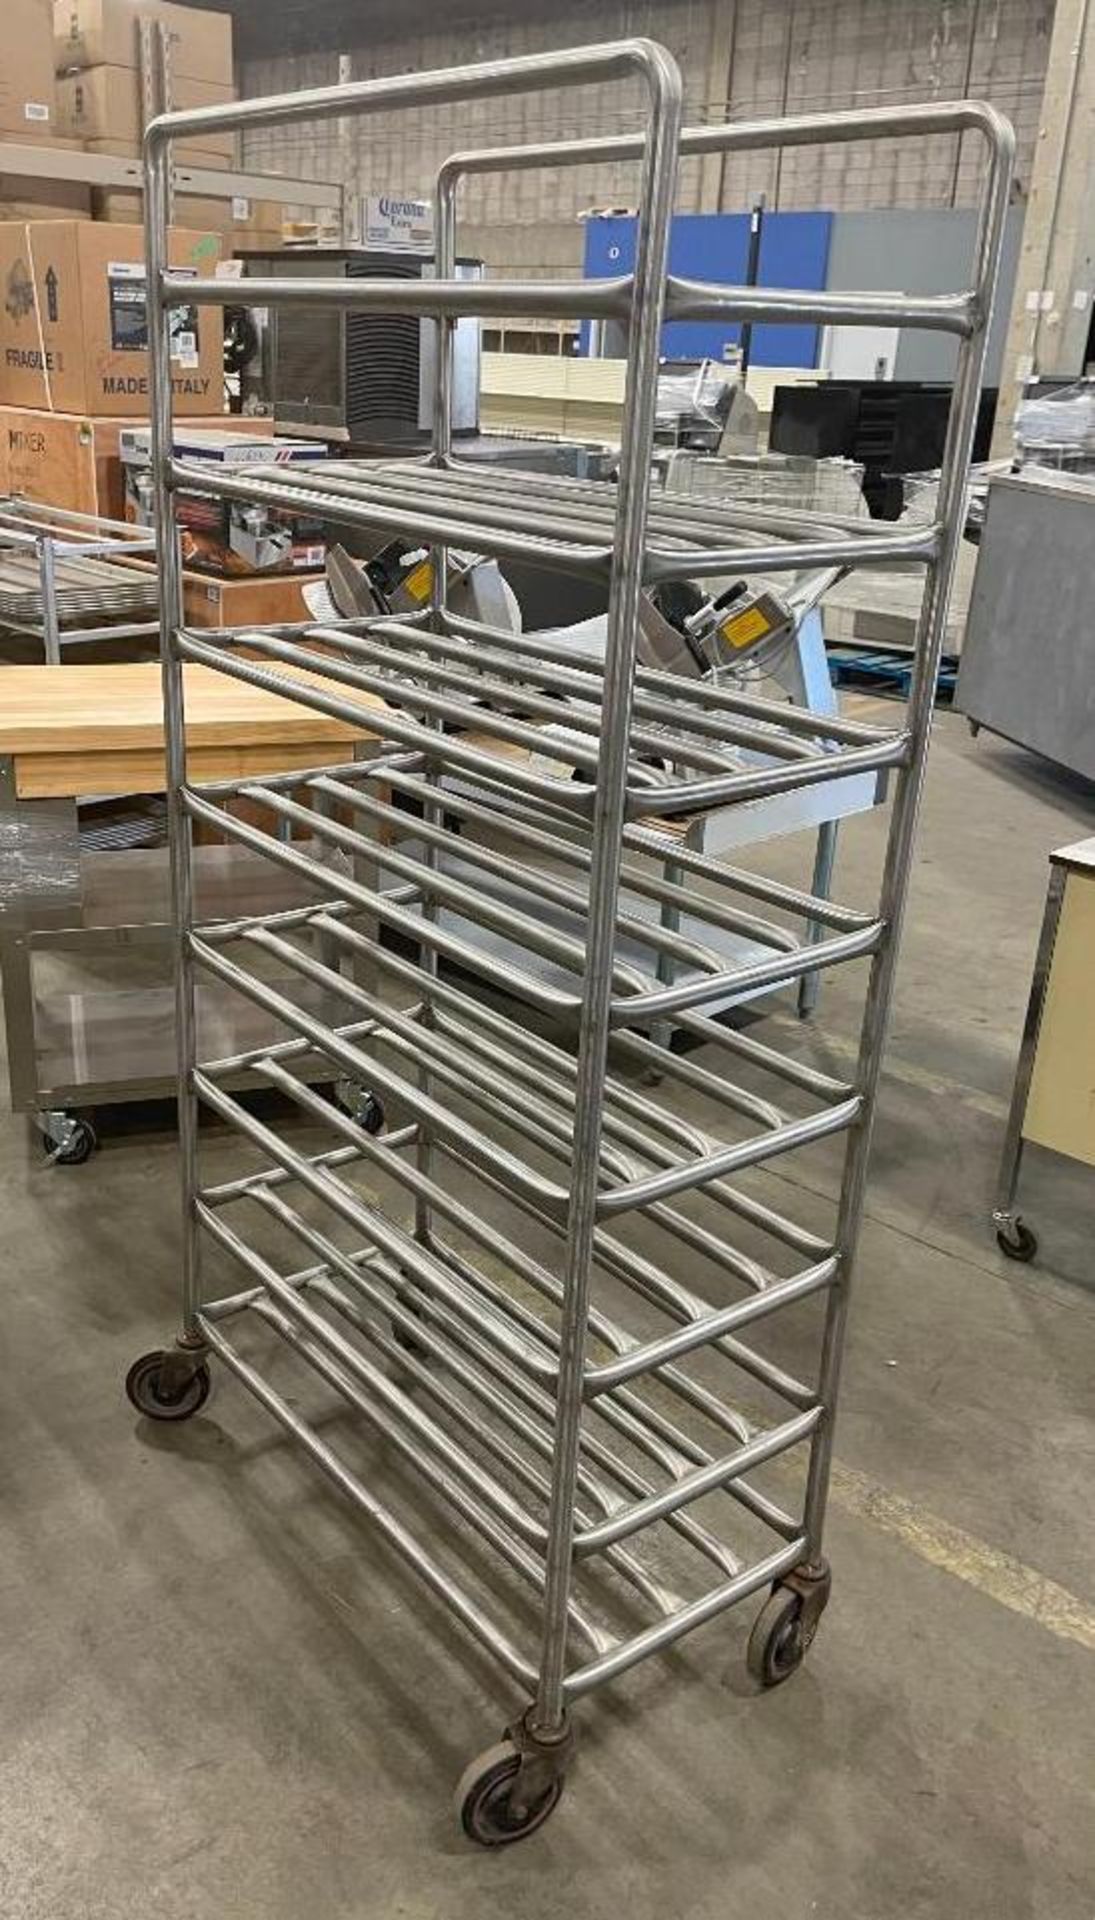 8 TIER STAINLESS STEEL MOBILE PLATTER CART - Image 4 of 4